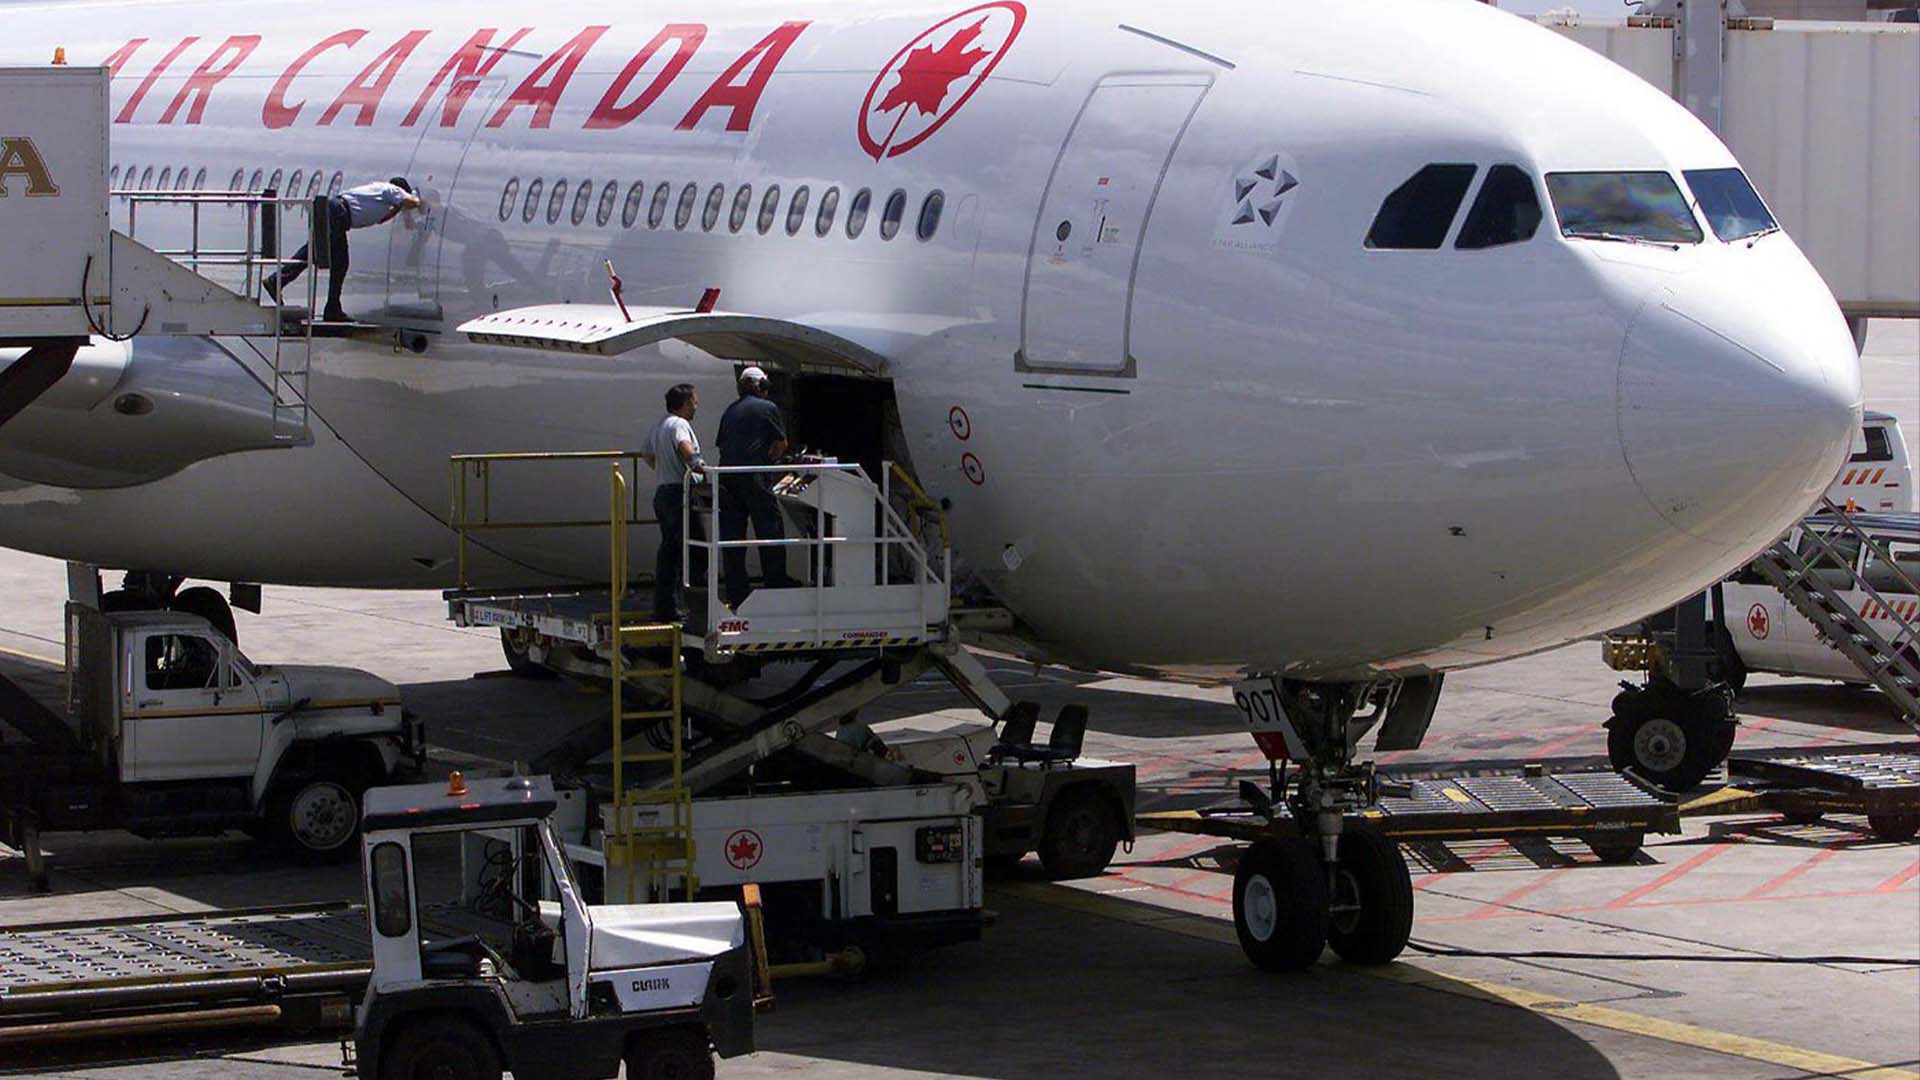 Canadian airlines rank last in on-time performance